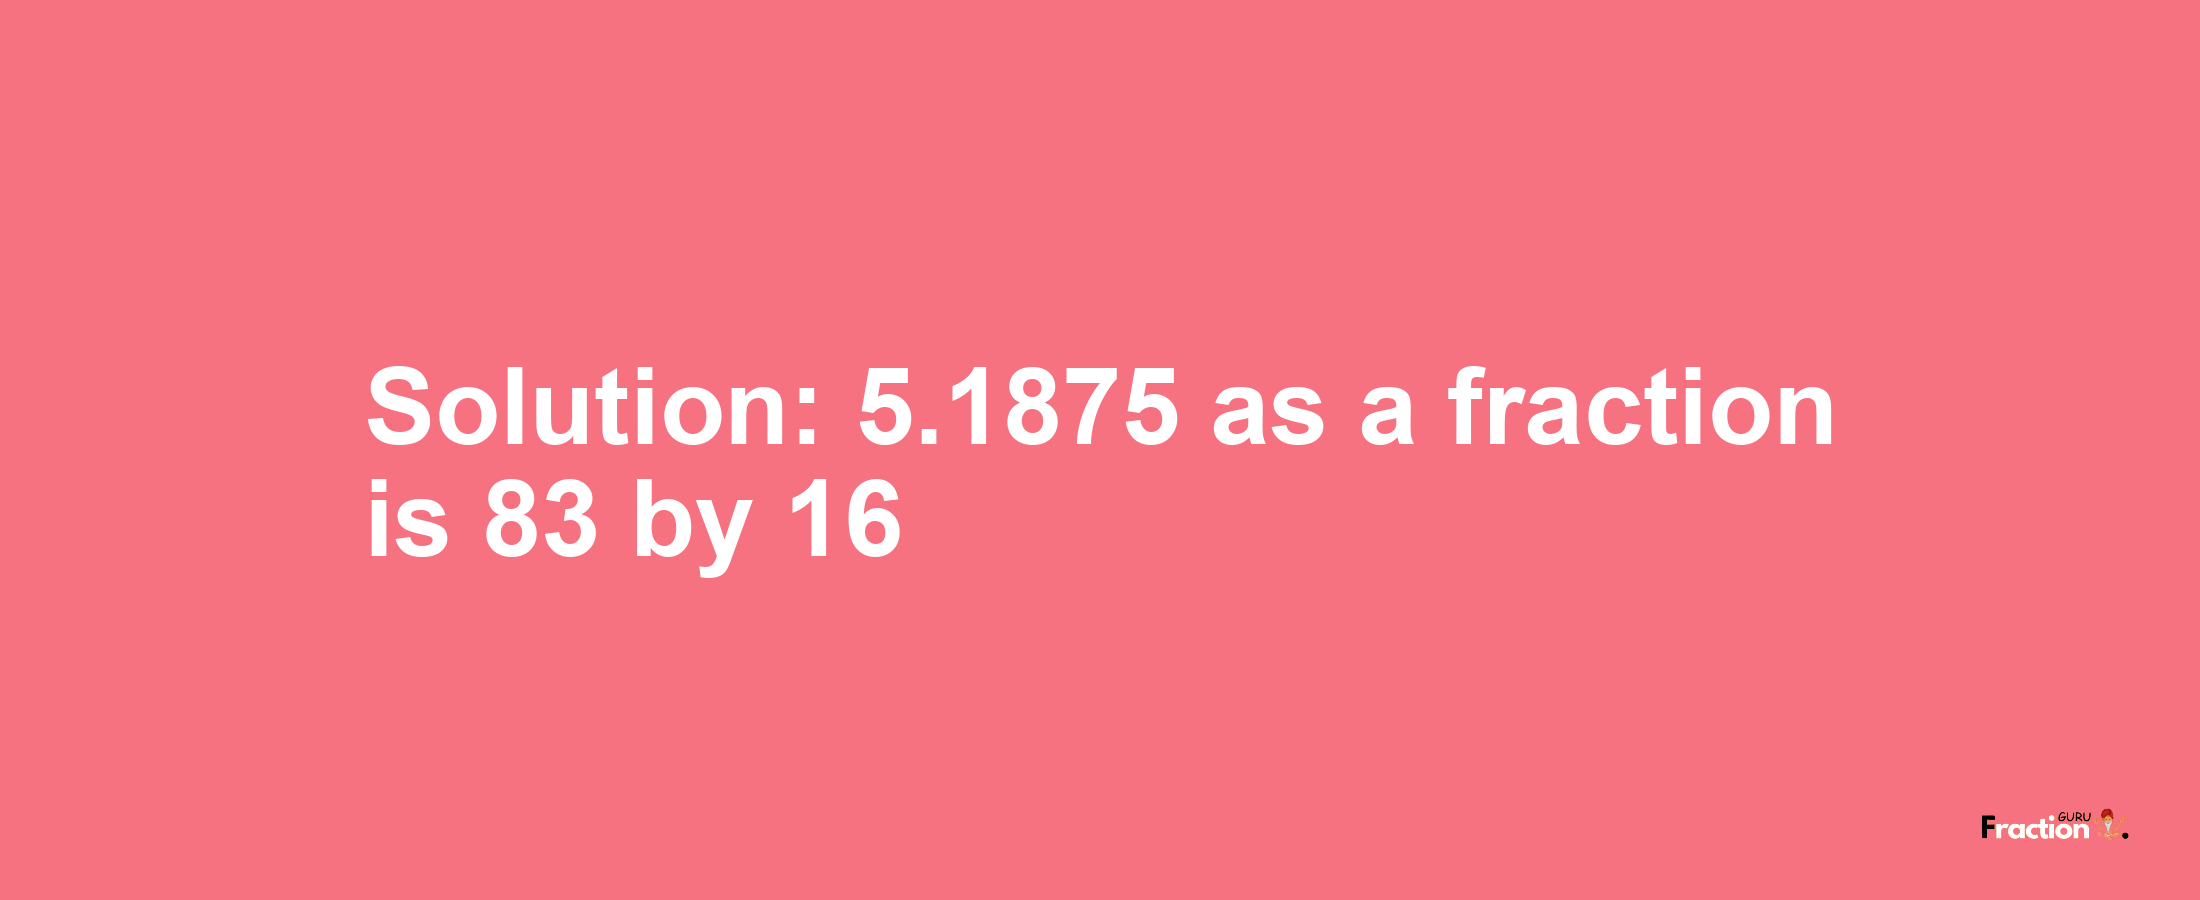 Solution:5.1875 as a fraction is 83/16